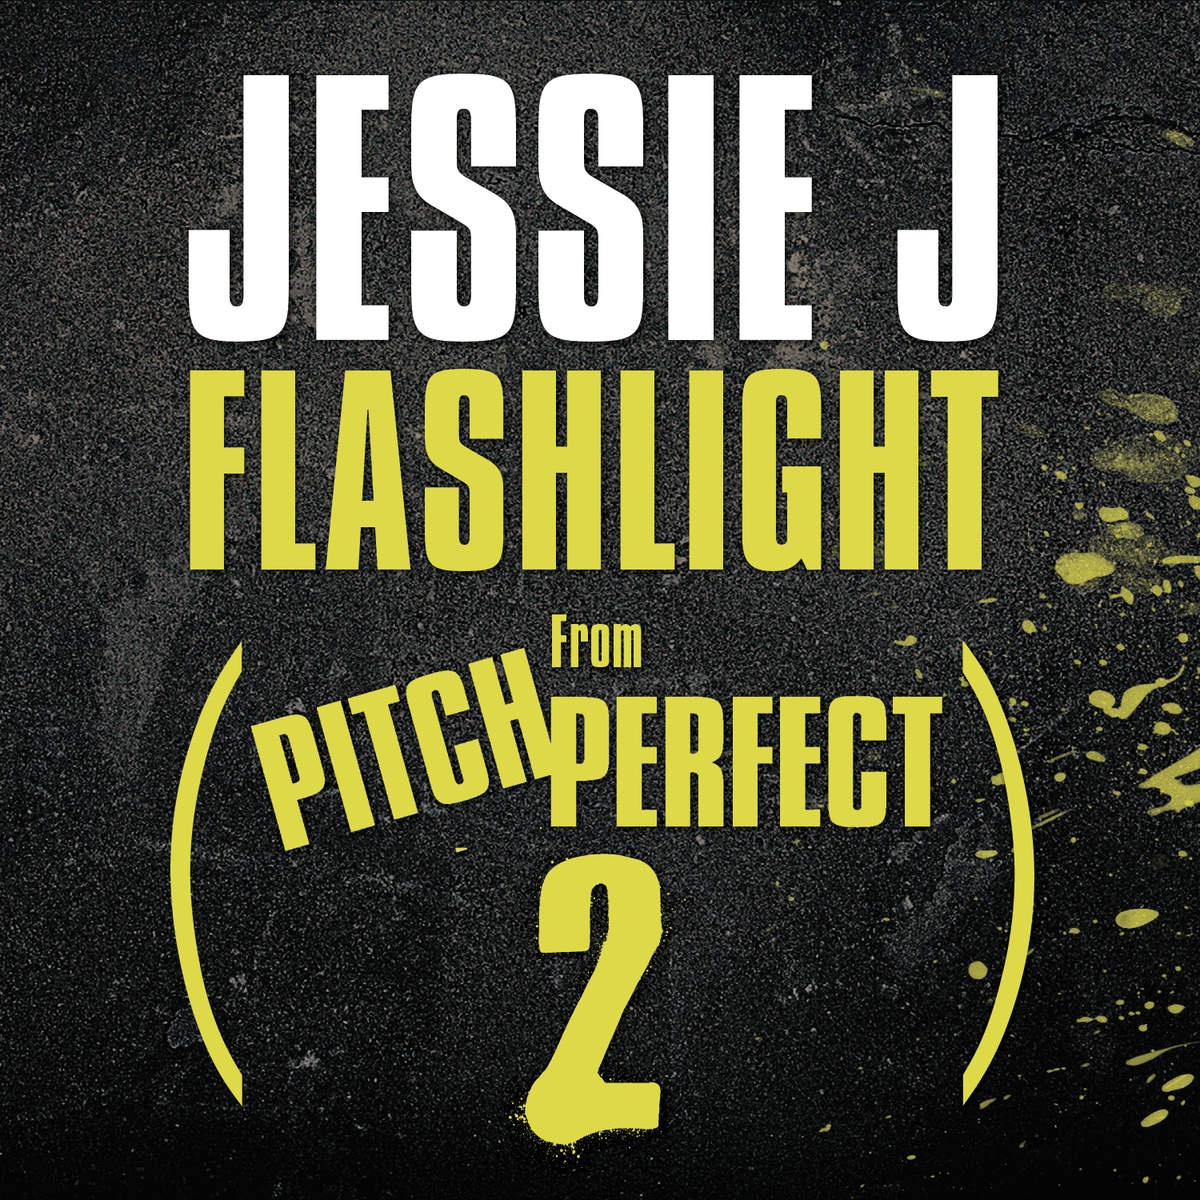 Flashlight - From "Pitch Perfect 2" Soundtrack